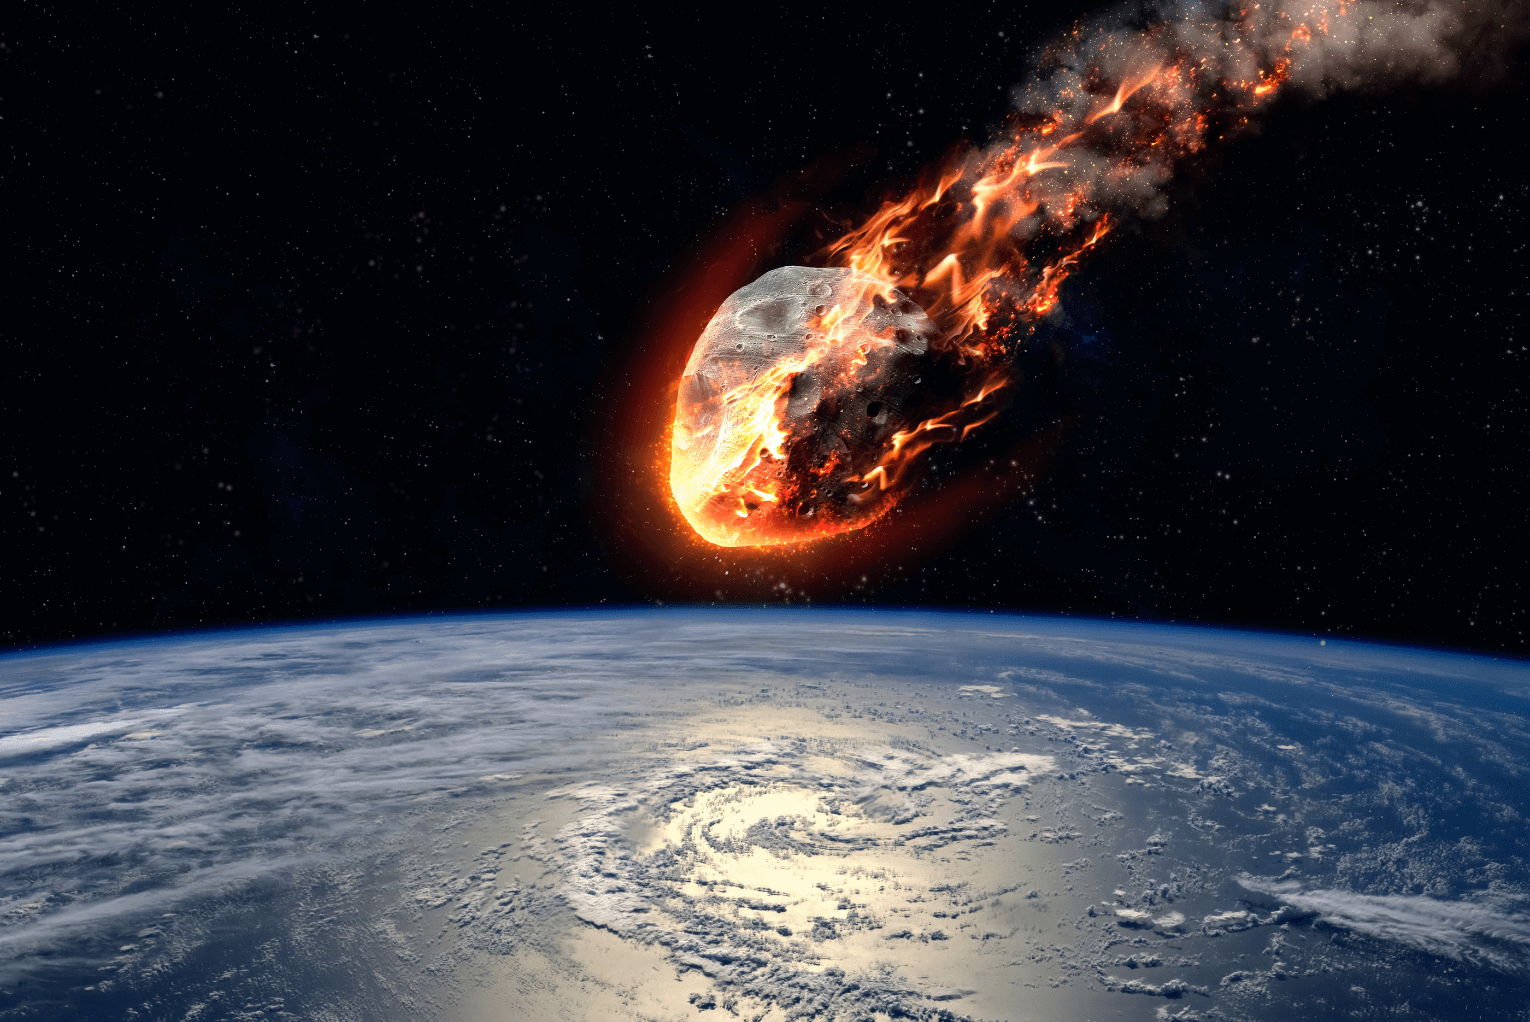 What was the Massive Fireball that Rocked New York?